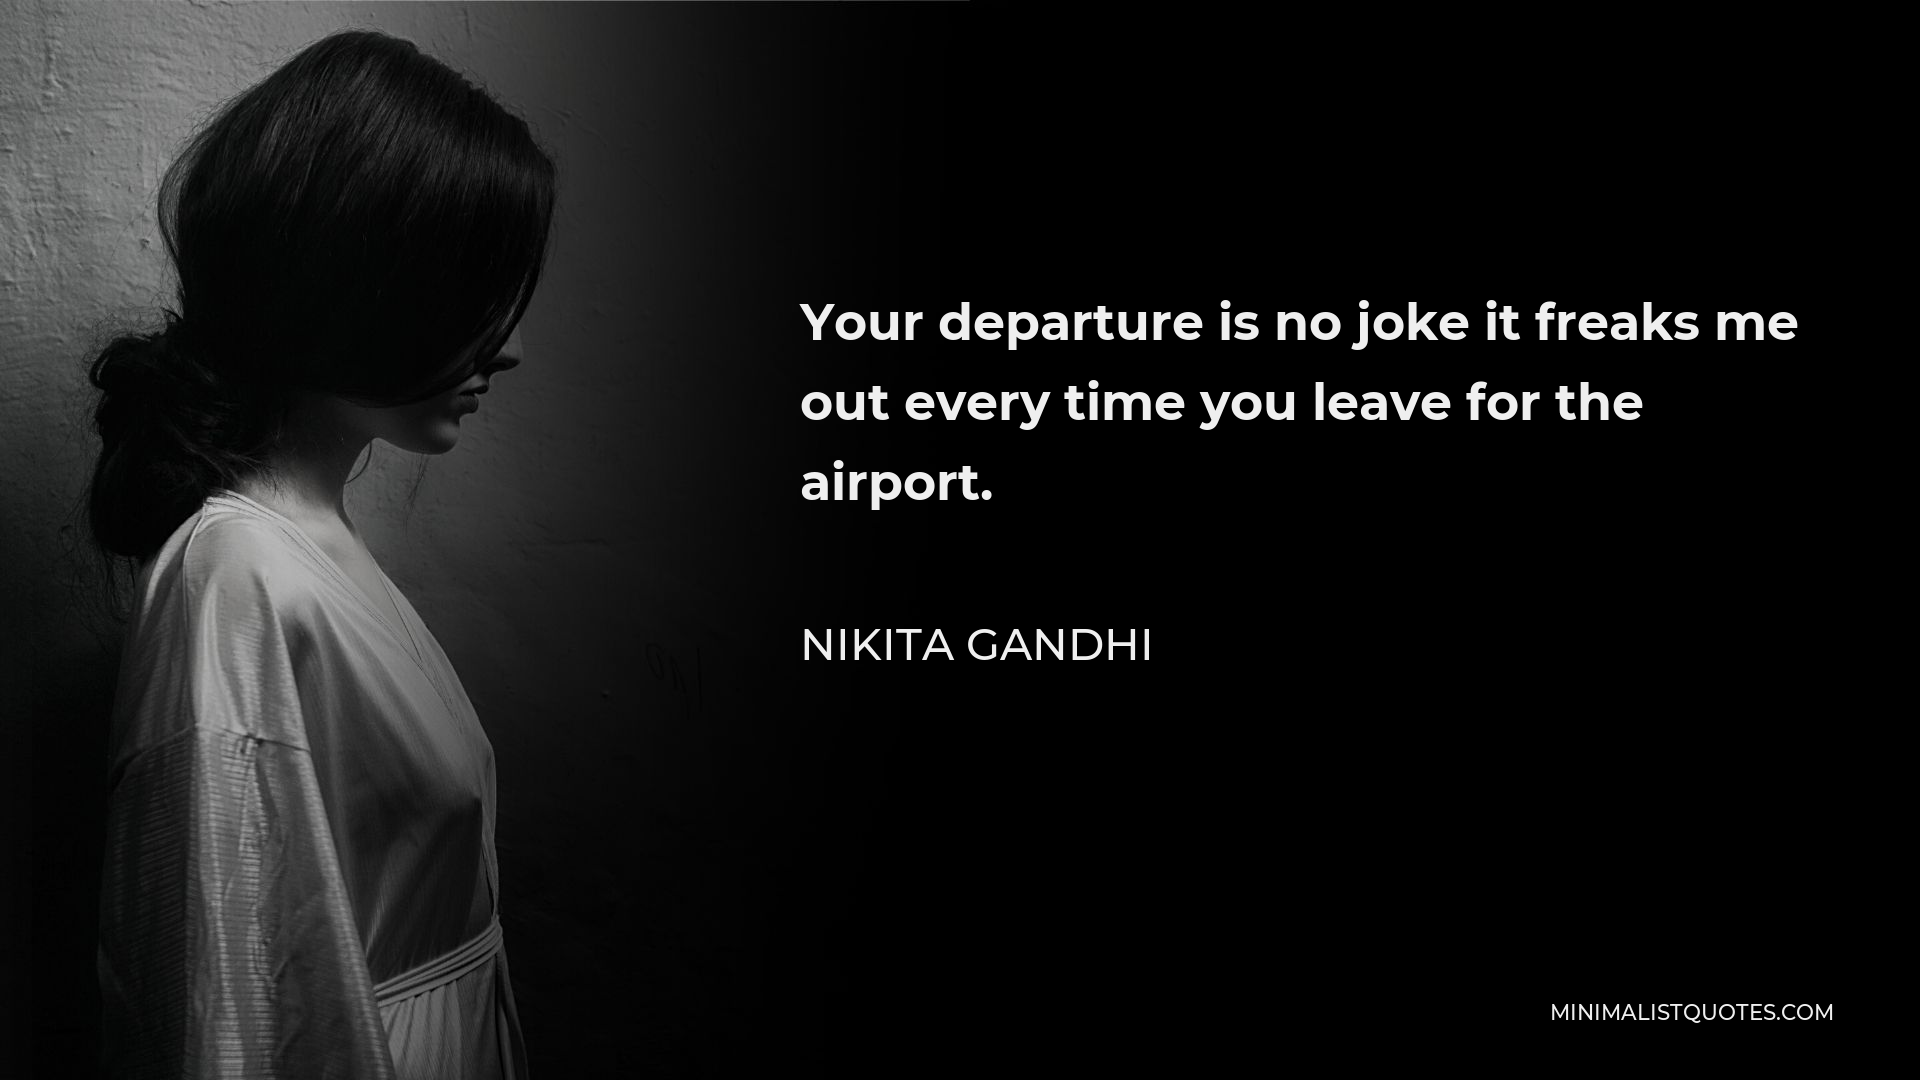 Nikita Gandhi Quote - Your departure is no joke it freaks me out every time you leave for the airport.